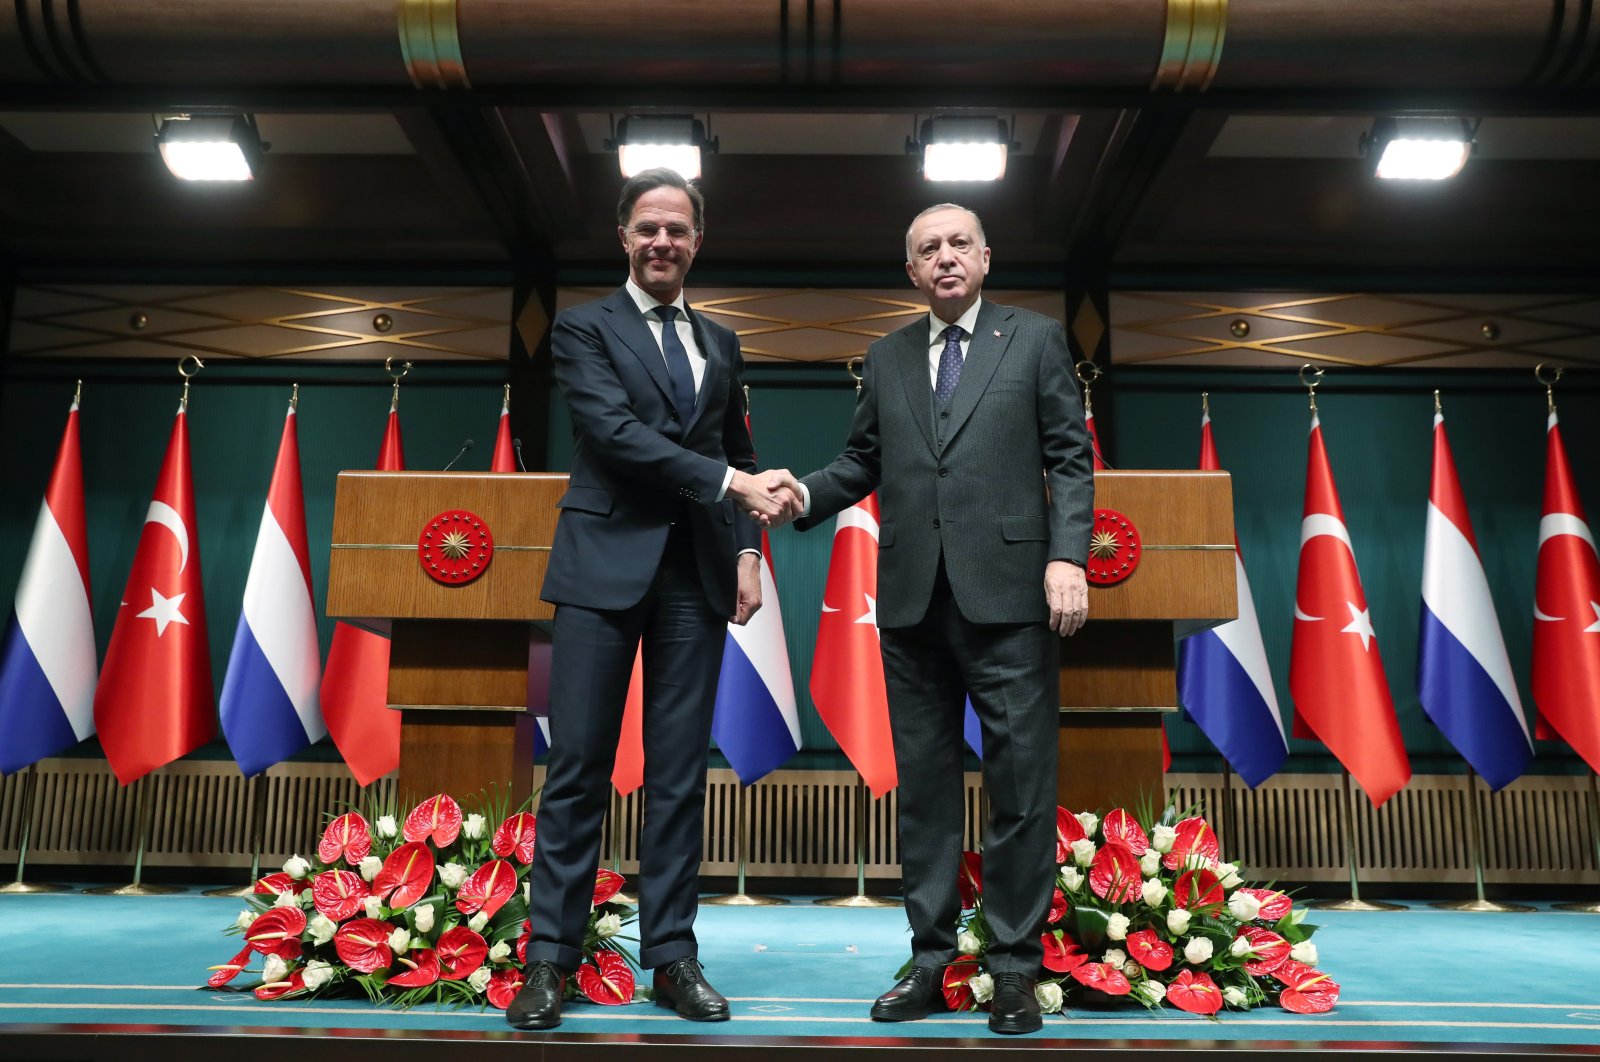 President Recep Tayyip Erdoğan and Dutch Prime Minister Mark Rutte attend a press conference after their meeting in the capital Ankara, Turkey, March 22, 2022. (EPA Photo)